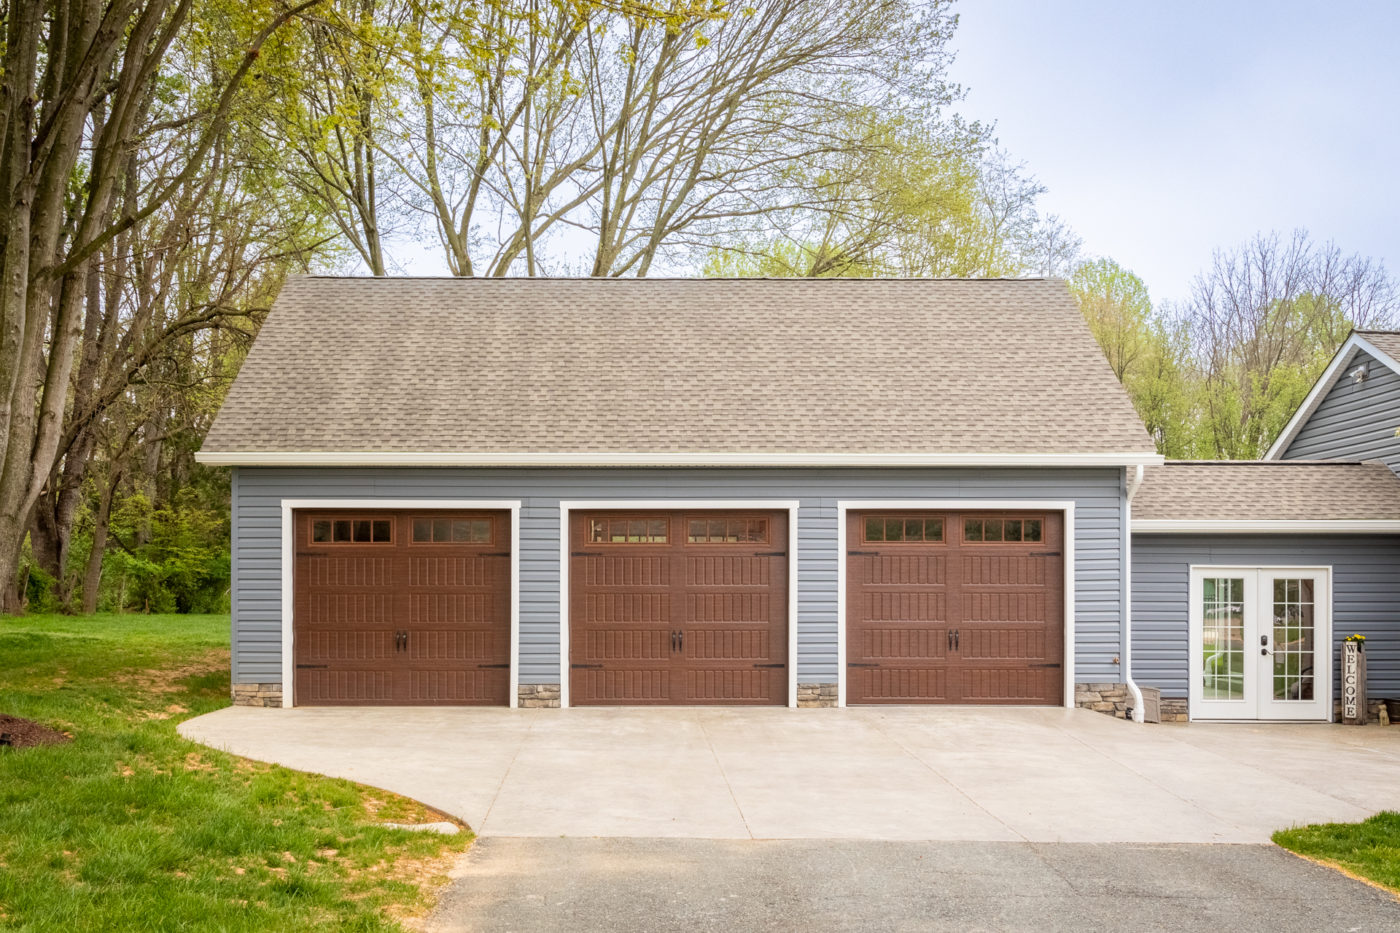 A three-car garage for sale from Sheds Unlimited